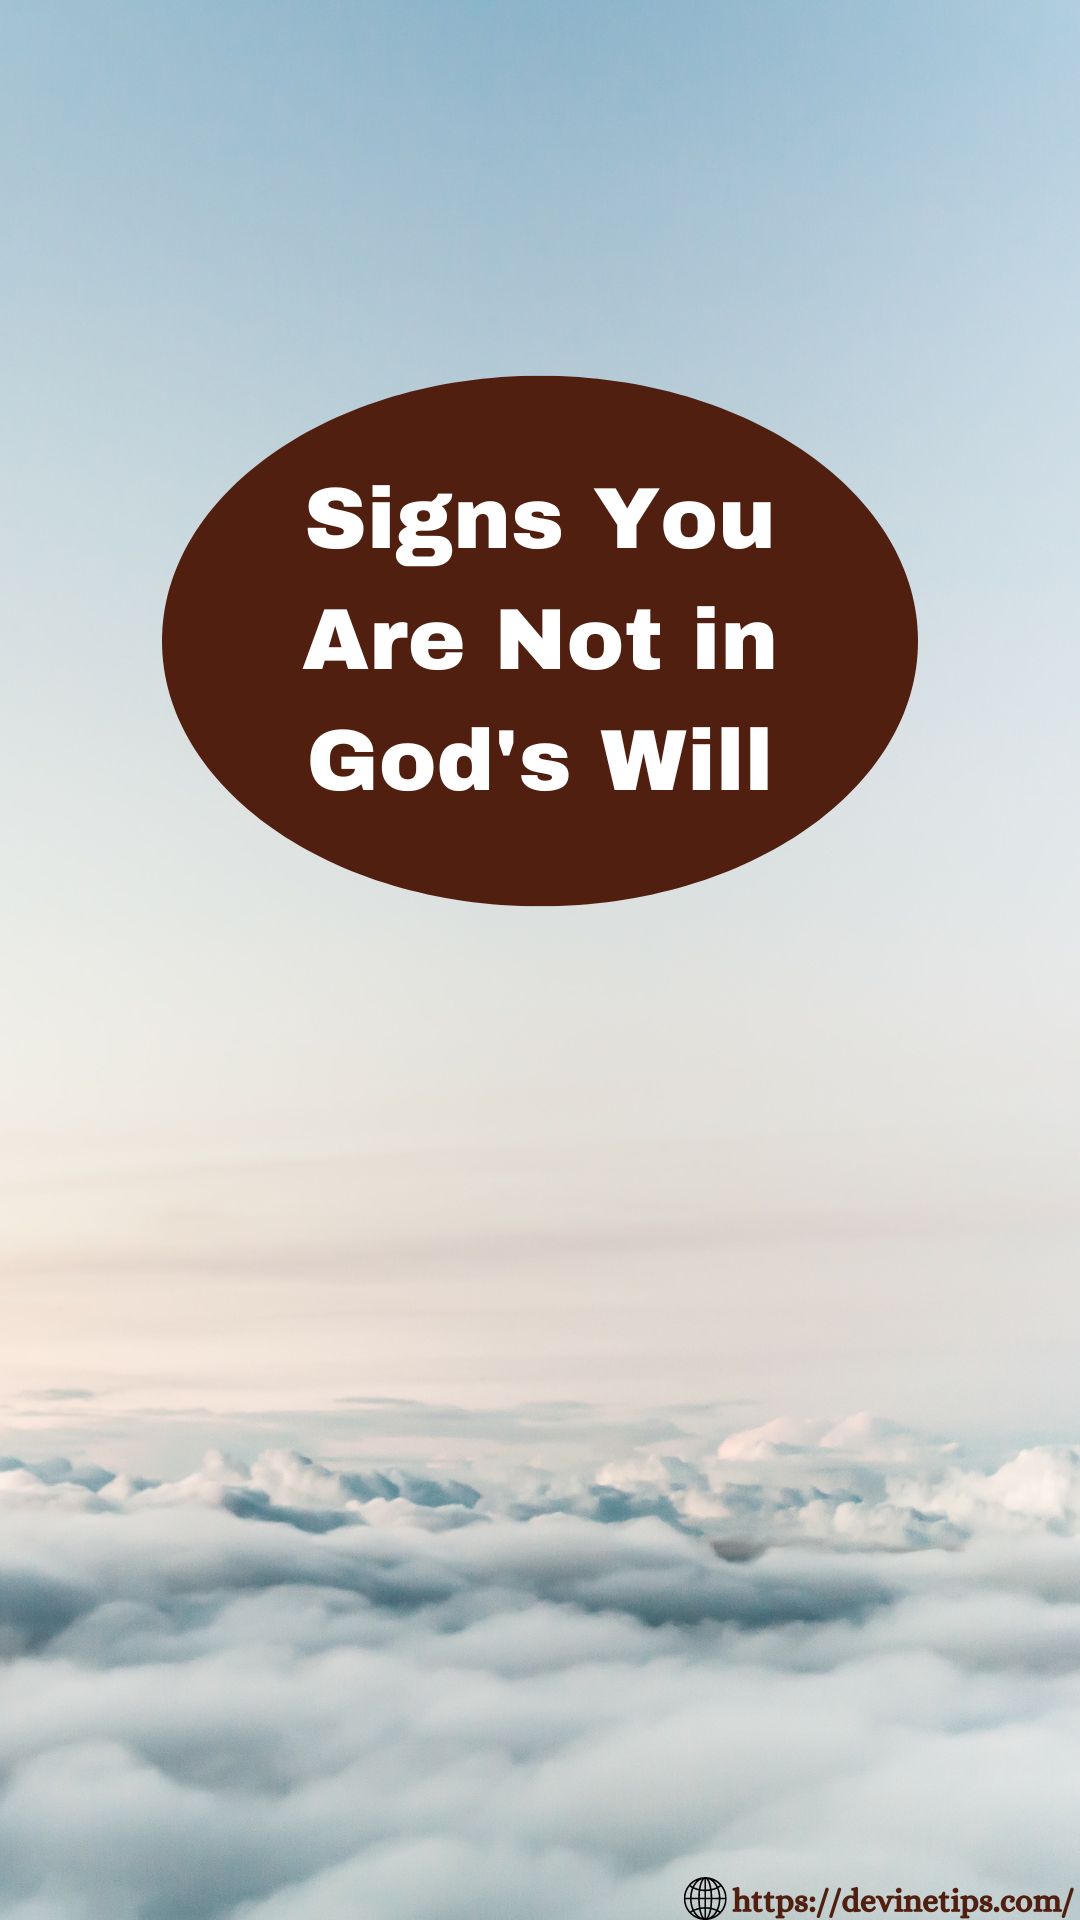 Signs you are not in God's will